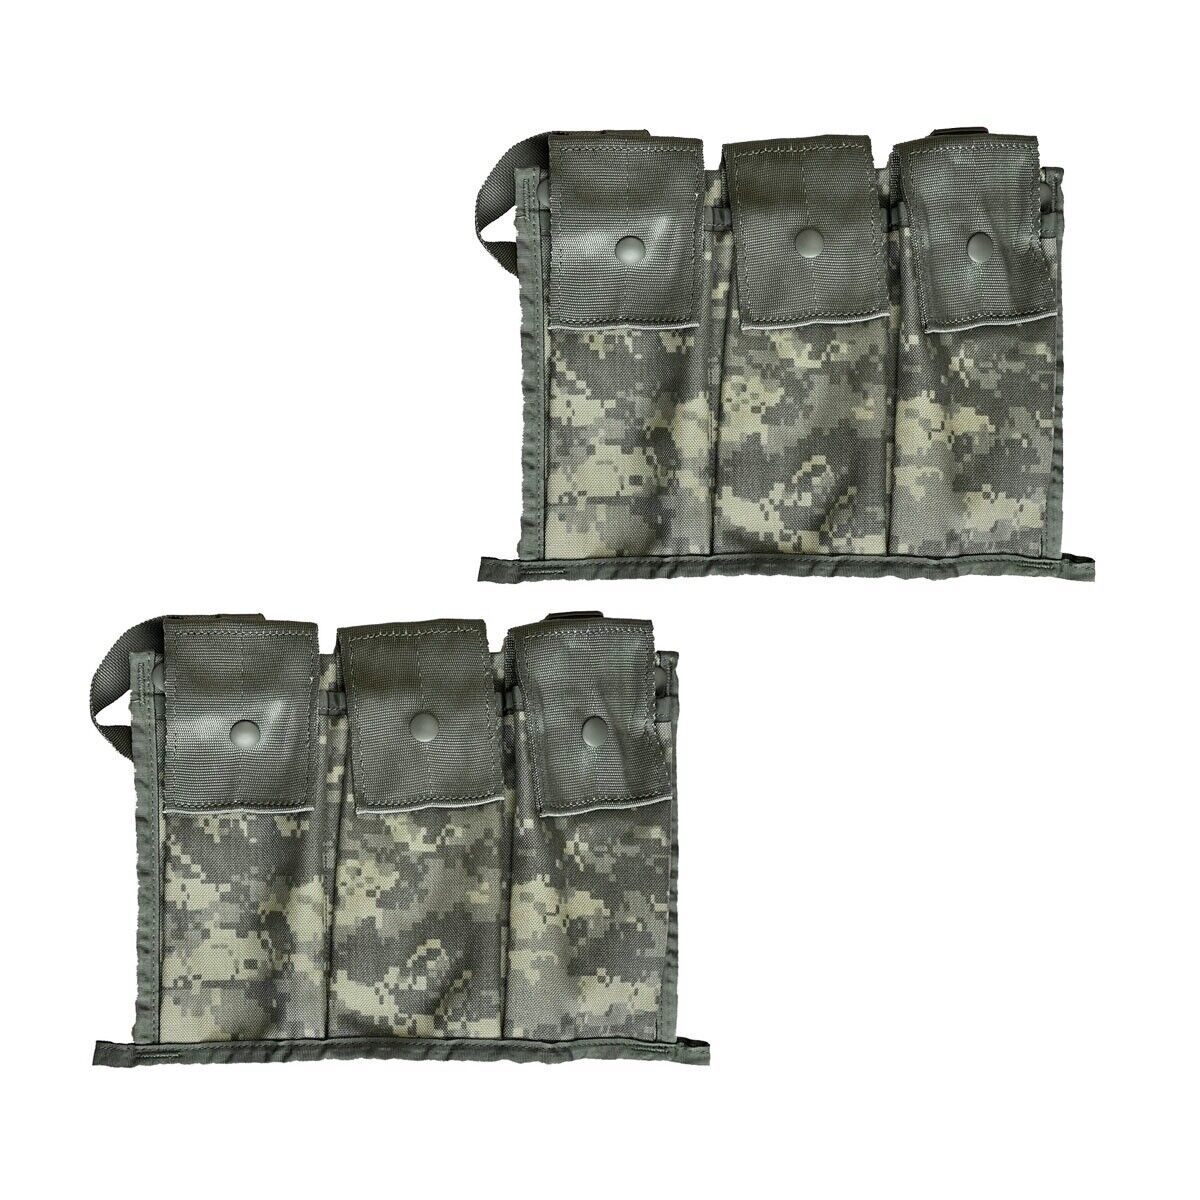 Pack of 2 Military 6 Magazine Bandoleer MOLLE II Mag Ammunition Pouch w/ Strap